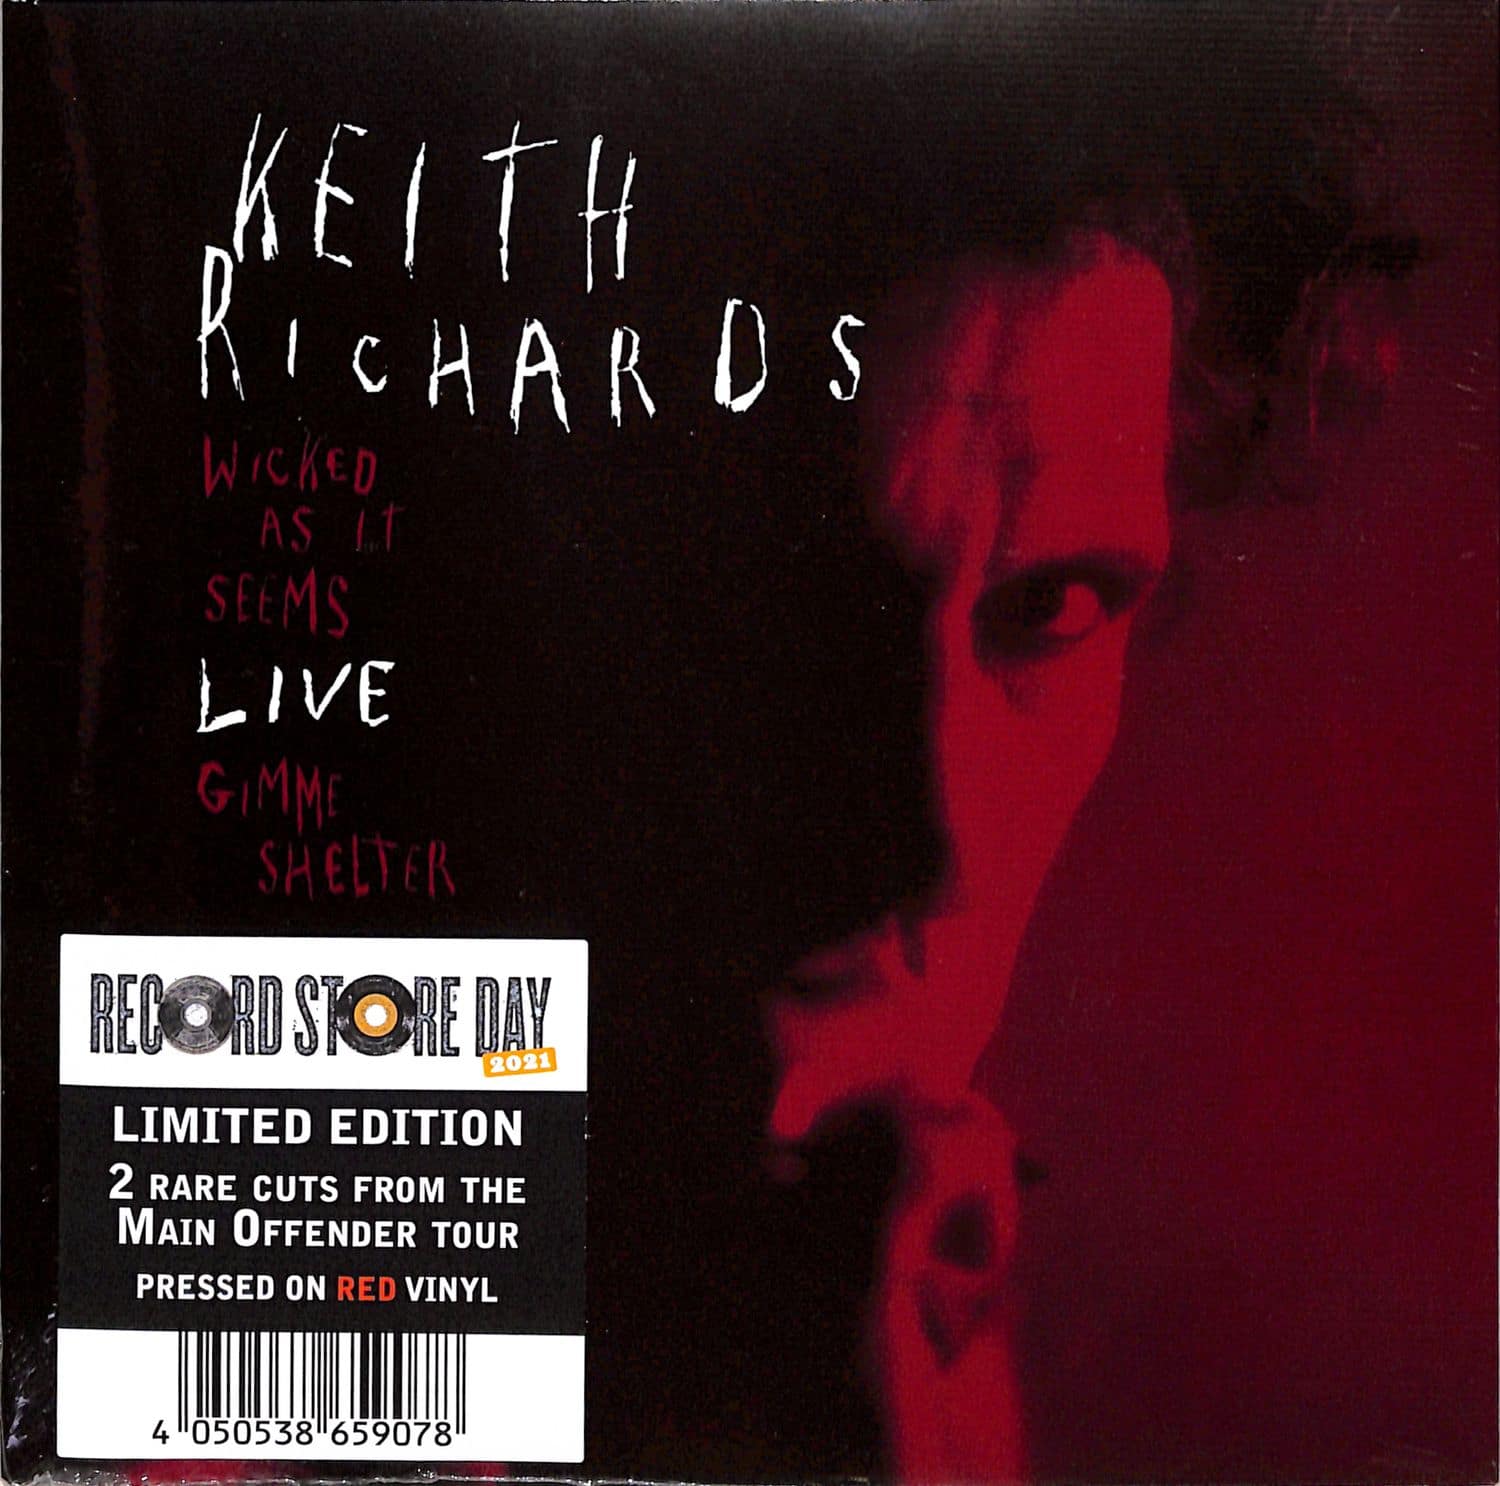 Keith Richards - WICKED AS IT SEEMS 